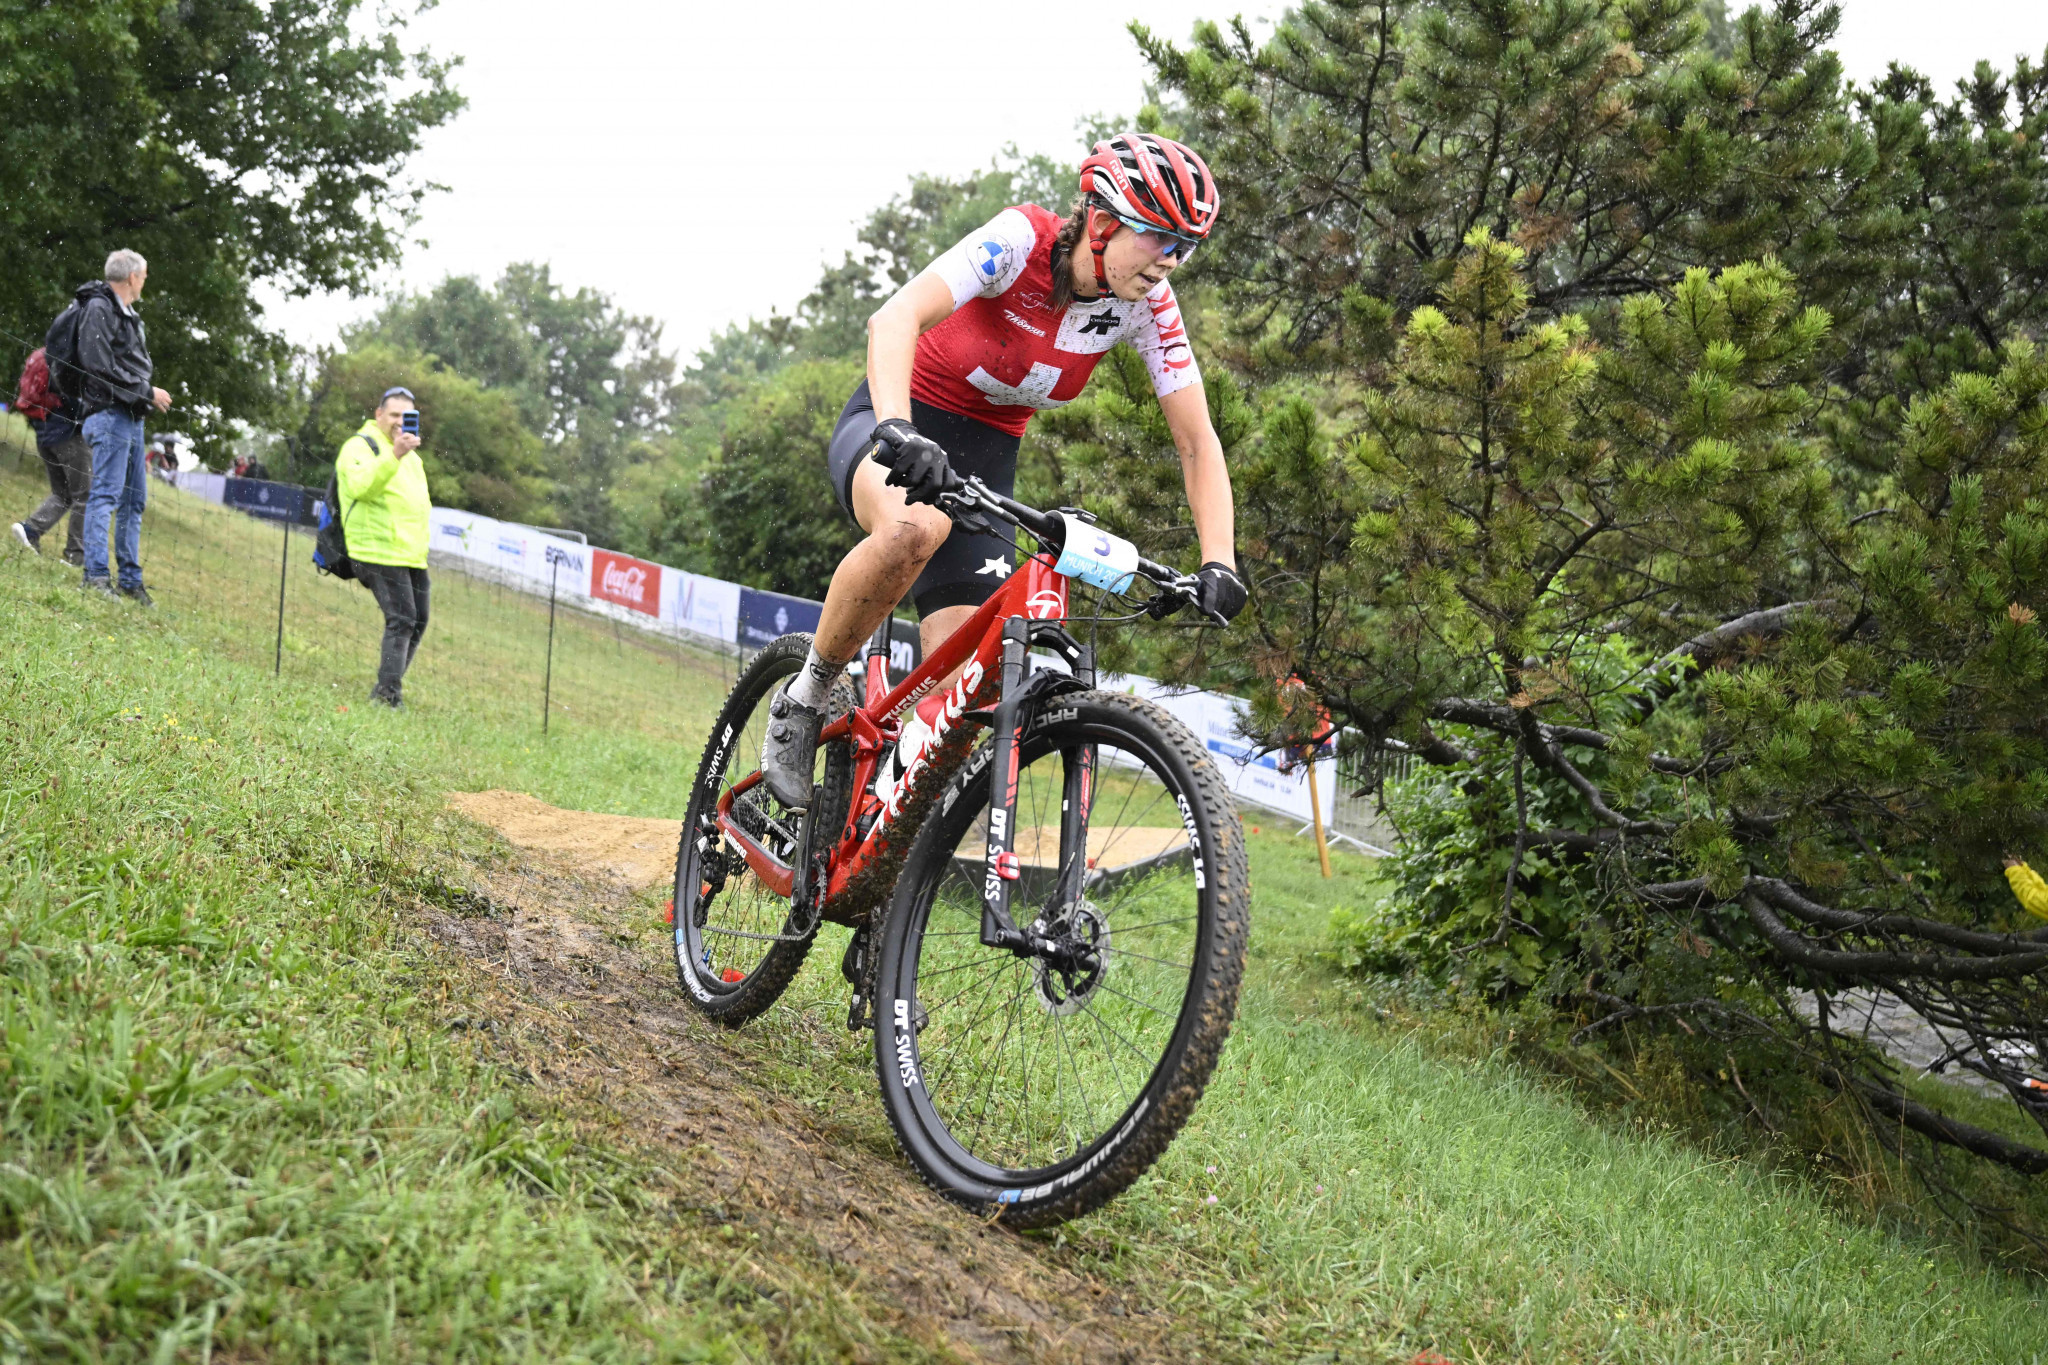 Alessandra Keller of Switzerland won her first women's cross-country overall title on the UCI Mountain Bike World Cup ©Getty Images